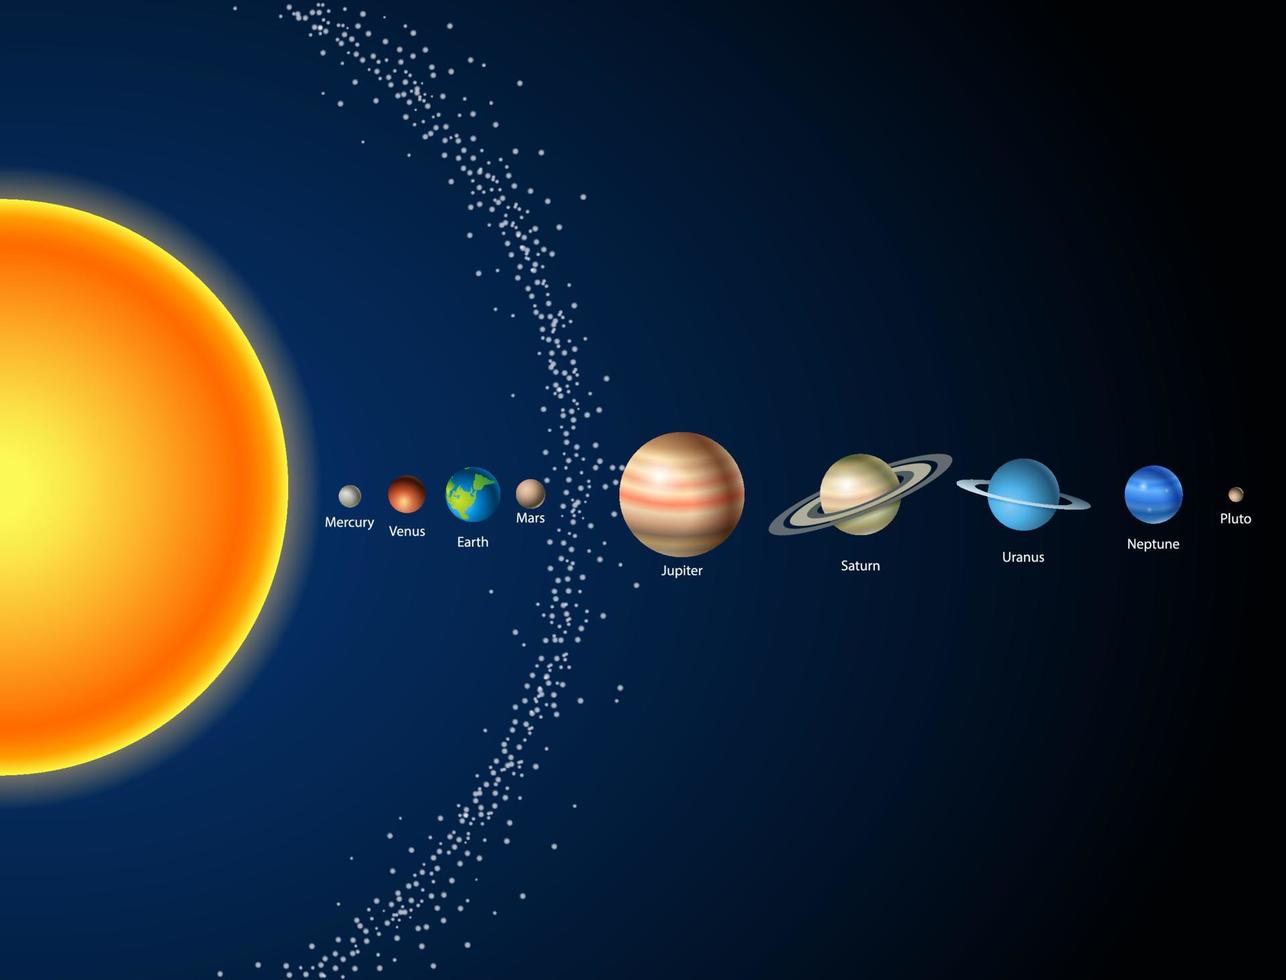 Solar system, sun and planets vector